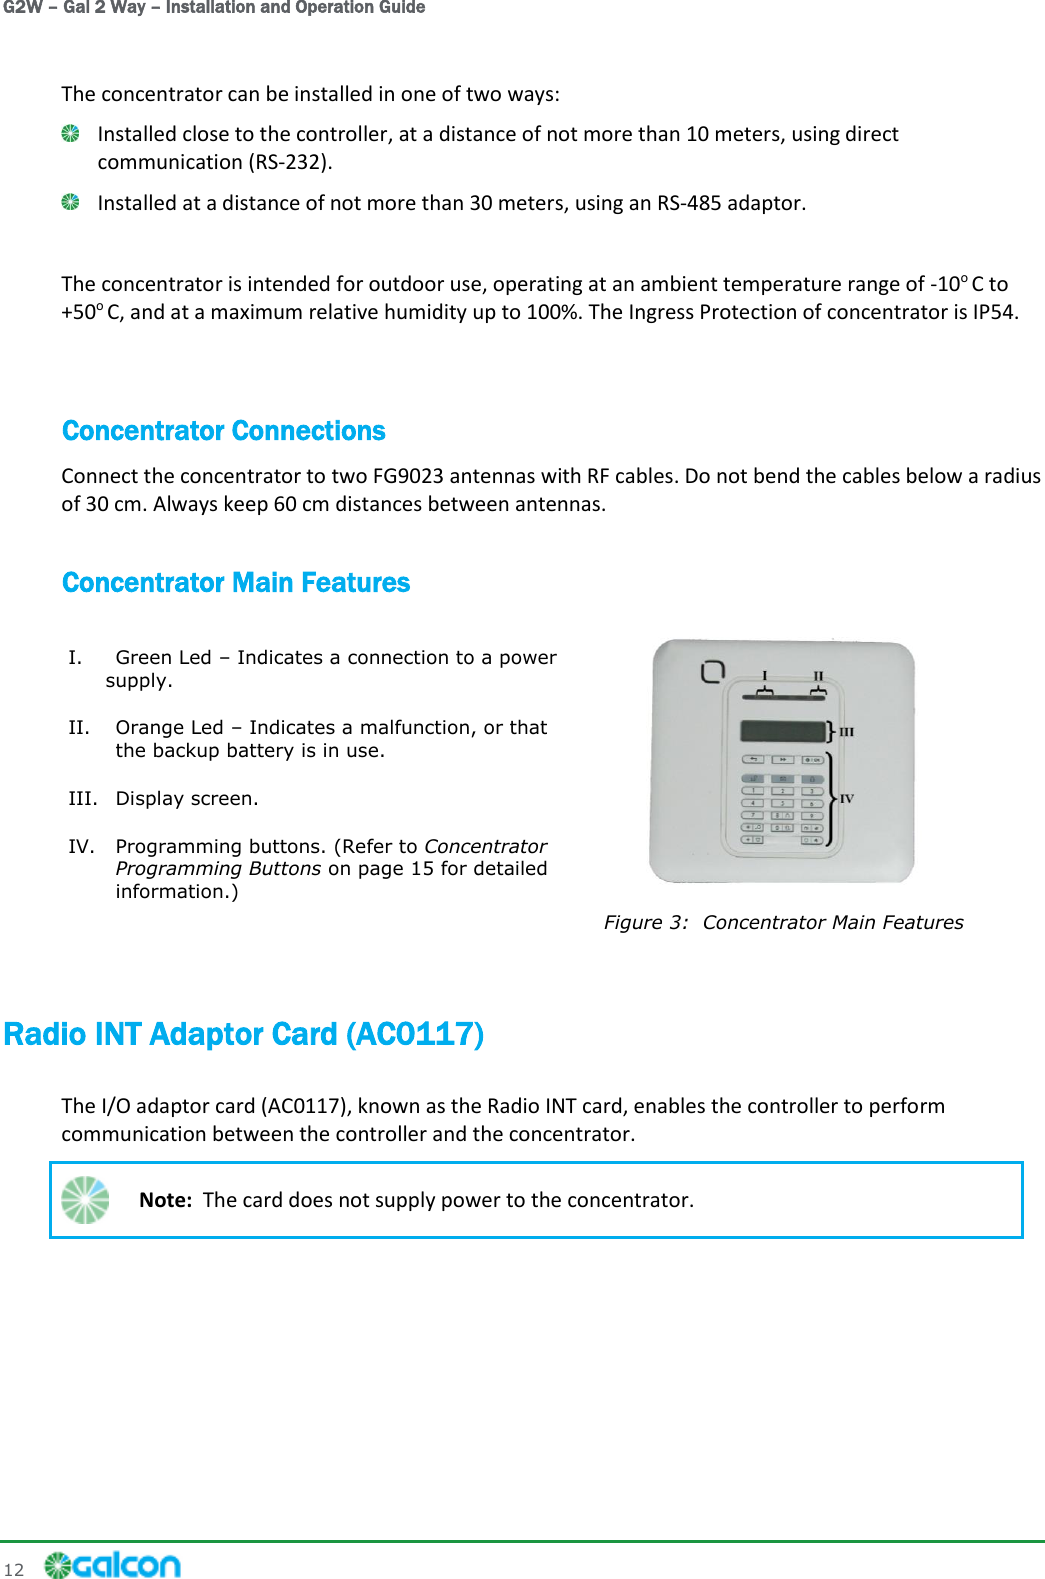 G2W – Gal 2 Way – Installation and Operation Guide 12     The concentrator can be installed in one of two ways:  Installed close to the controller, at a distance of not more than 10 meters, using direct communication (RS-232).  Installed at a distance of not more than 30 meters, using an RS-485 adaptor.  The concentrator is intended for outdoor use, operating at an ambient temperature range of -10o C to +50o C, and at a maximum relative humidity up to 100%. The Ingress Protection of concentrator is IP54.  Concentrator Connections Connect the concentrator to two FG9023 antennas with RF cables. Do not bend the cables below a radius of 30 cm. Always keep 60 cm distances between antennas. Concentrator Main Features  Figure 3:  Concentrator Main Features I. Green Led – Indicates a connection to a power supply. II. Orange Led – Indicates a malfunction, or that the backup battery is in use. III. Display screen. IV. Programming buttons. (Refer to Concentrator Programming Buttons on page 15 for detailed information.)  Radio INT Adaptor Card (AC0117) The I/O adaptor card (AC0117), known as the Radio INT card, enables the controller to perform communication between the controller and the concentrator.  Note:  The card does not supply power to the concentrator. 